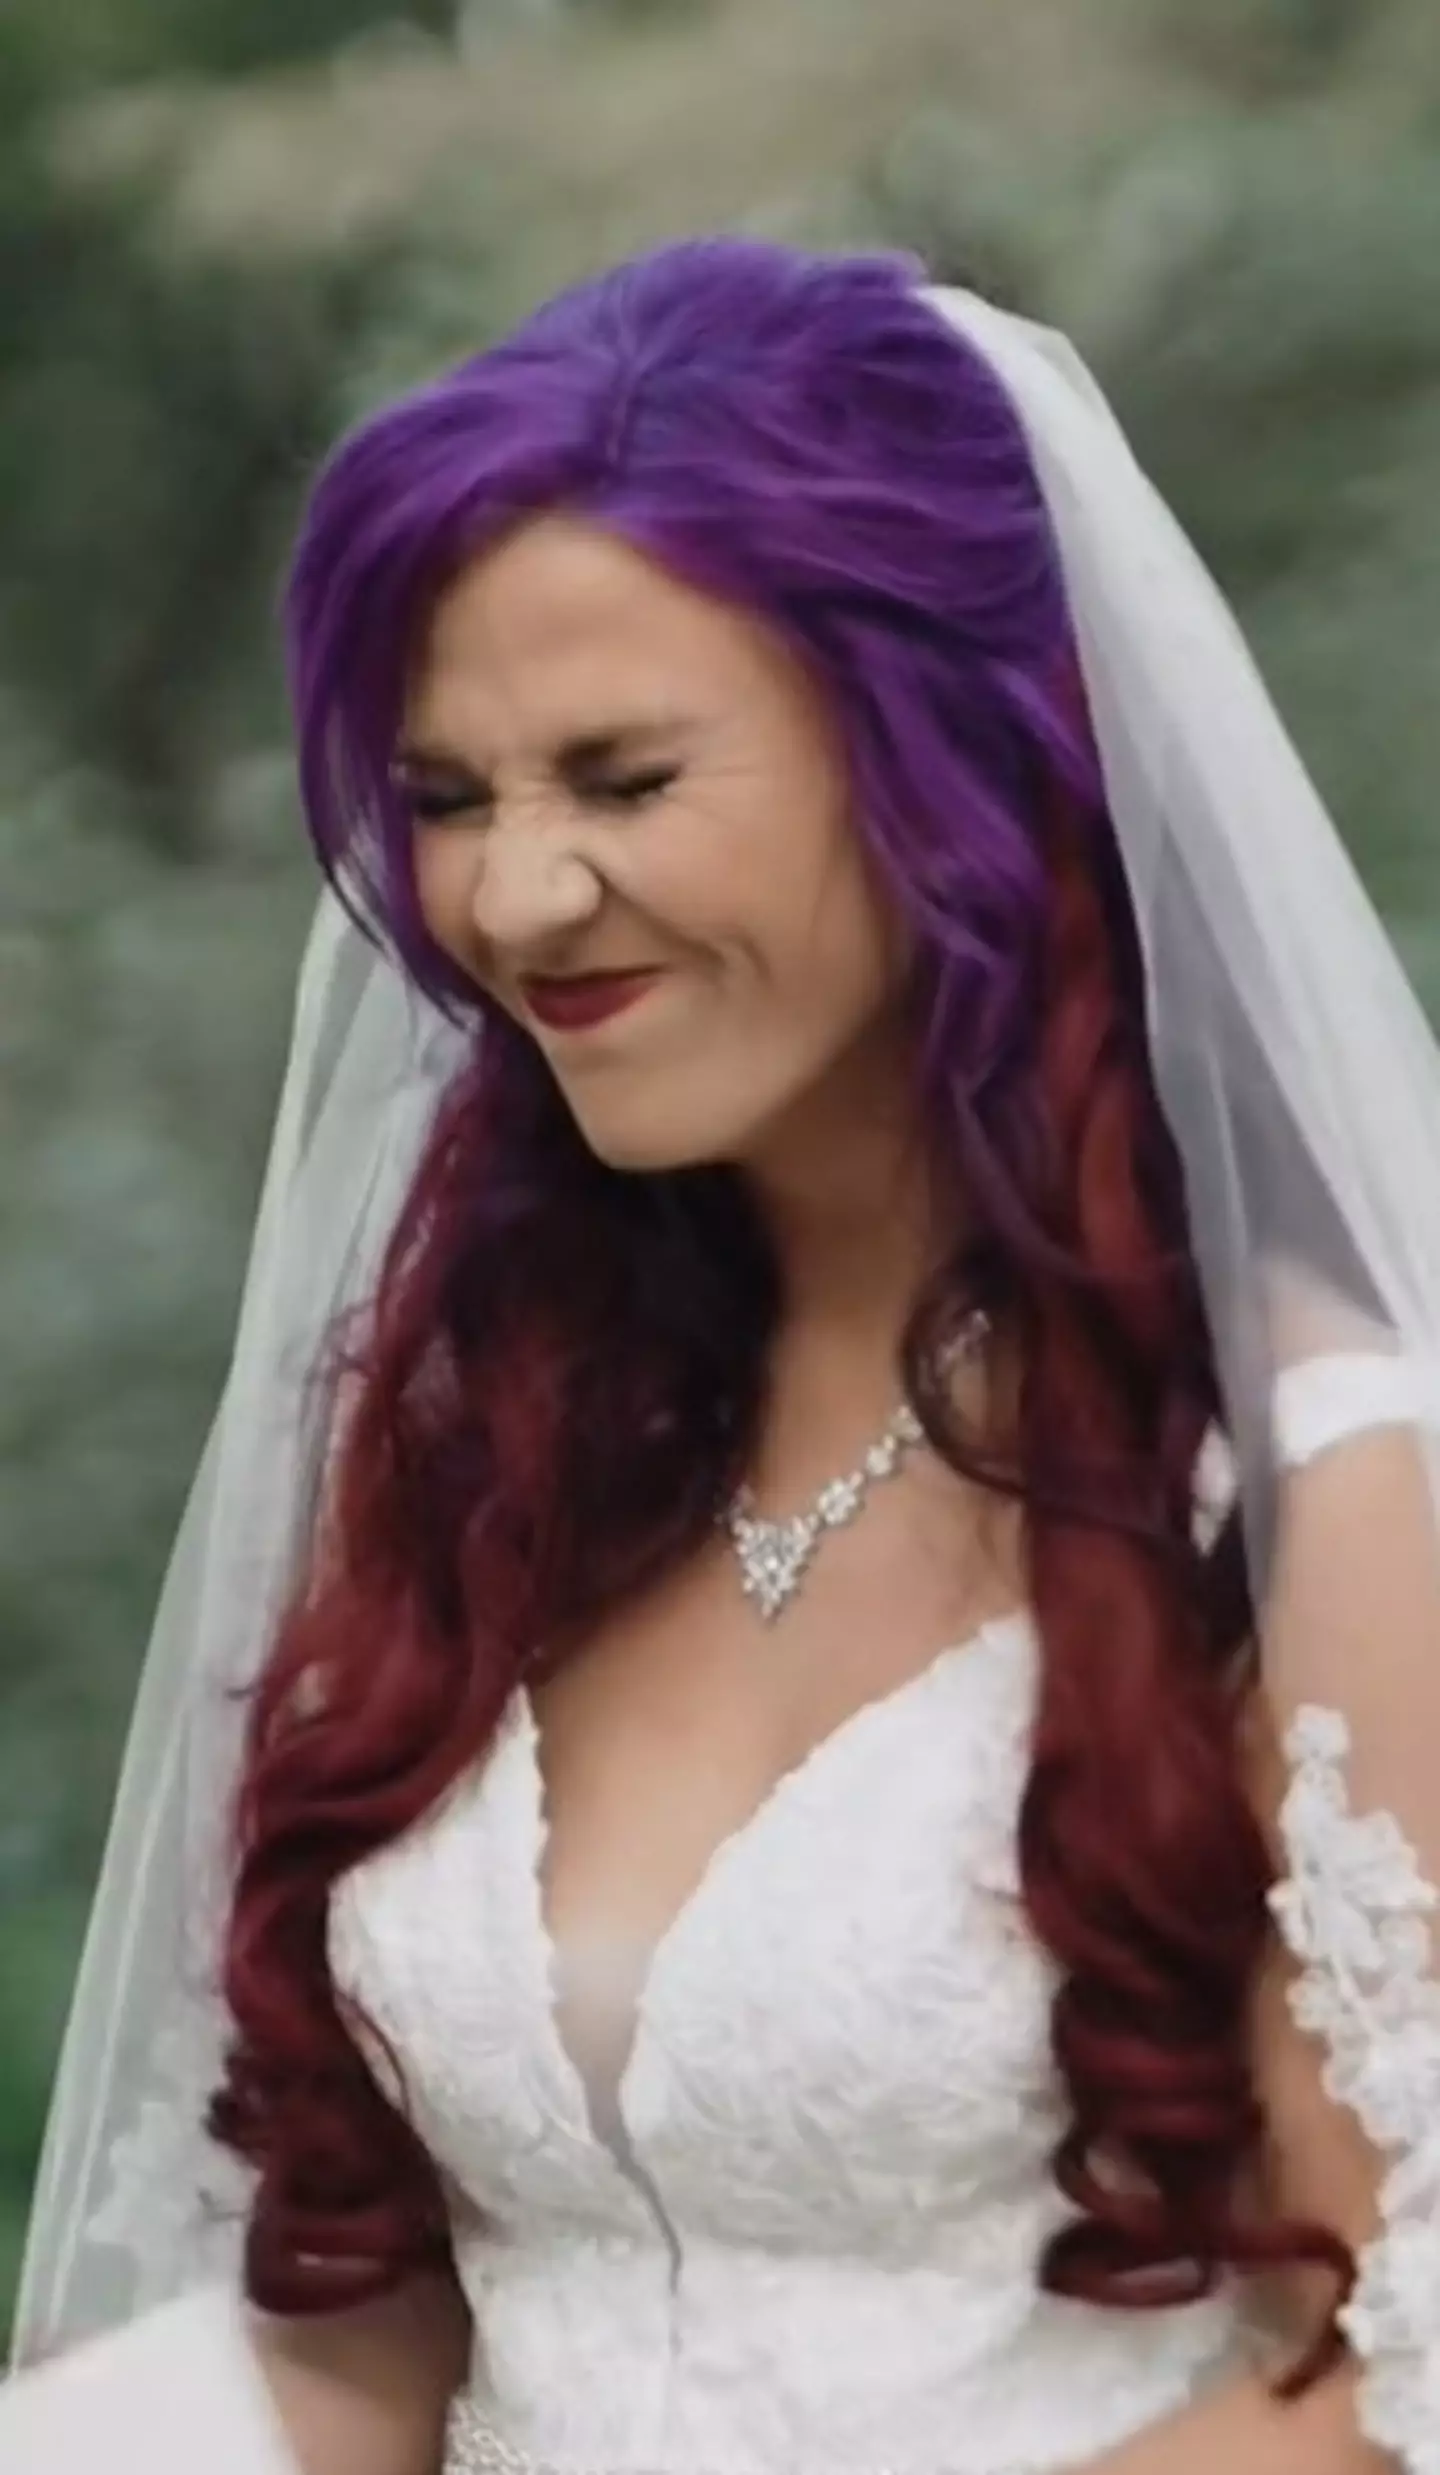 Denise was left cracking up during the vows.